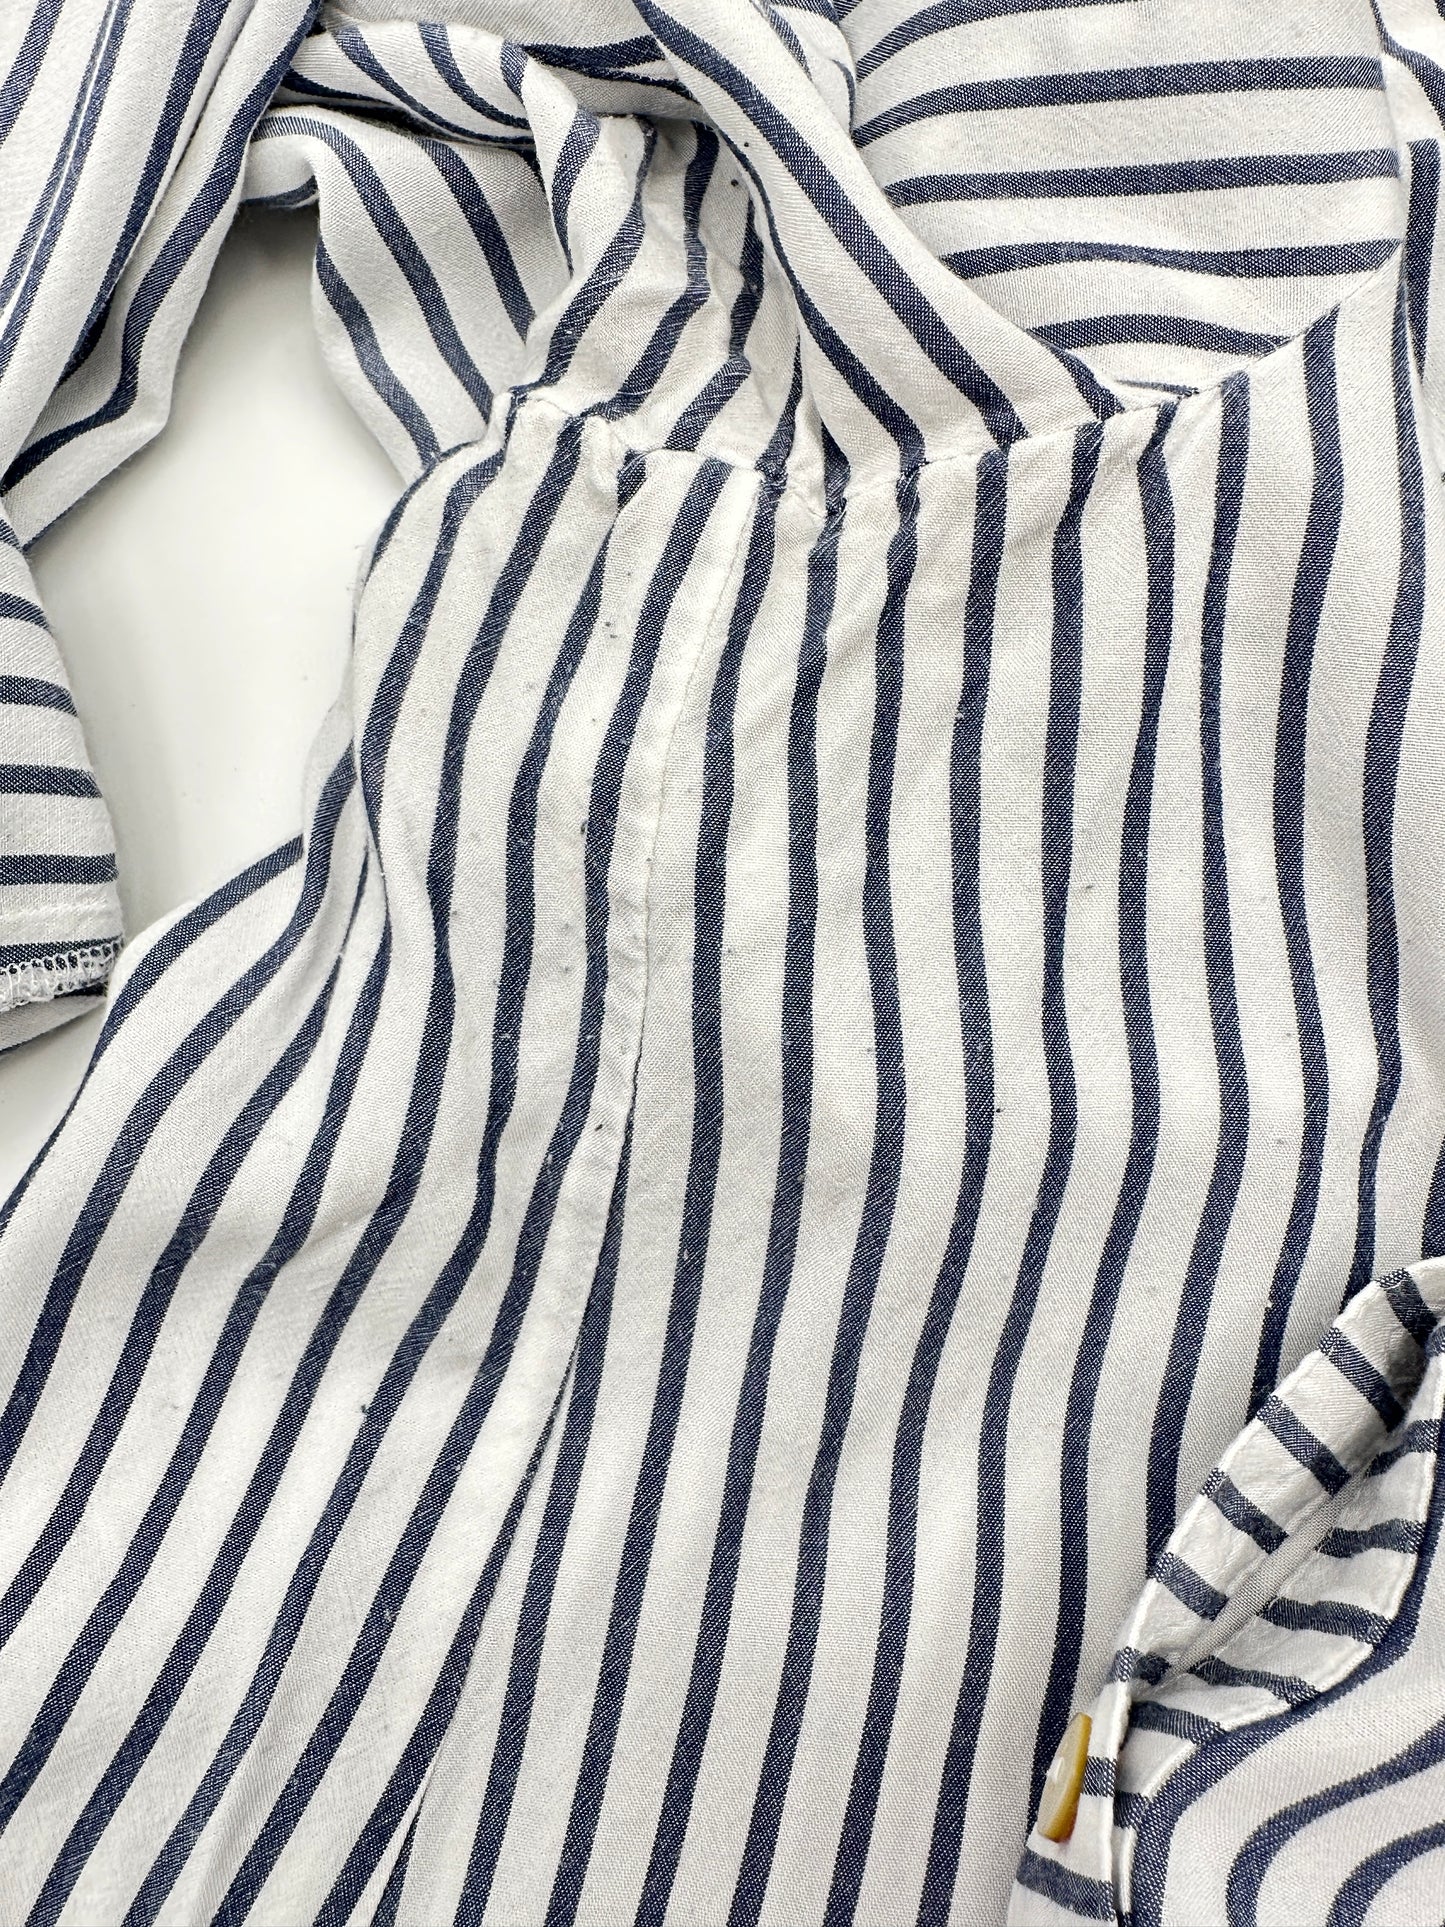 J.Jill Size M Blue & White Striped Roll-Tab Sleeve Blouse Button-Up Top